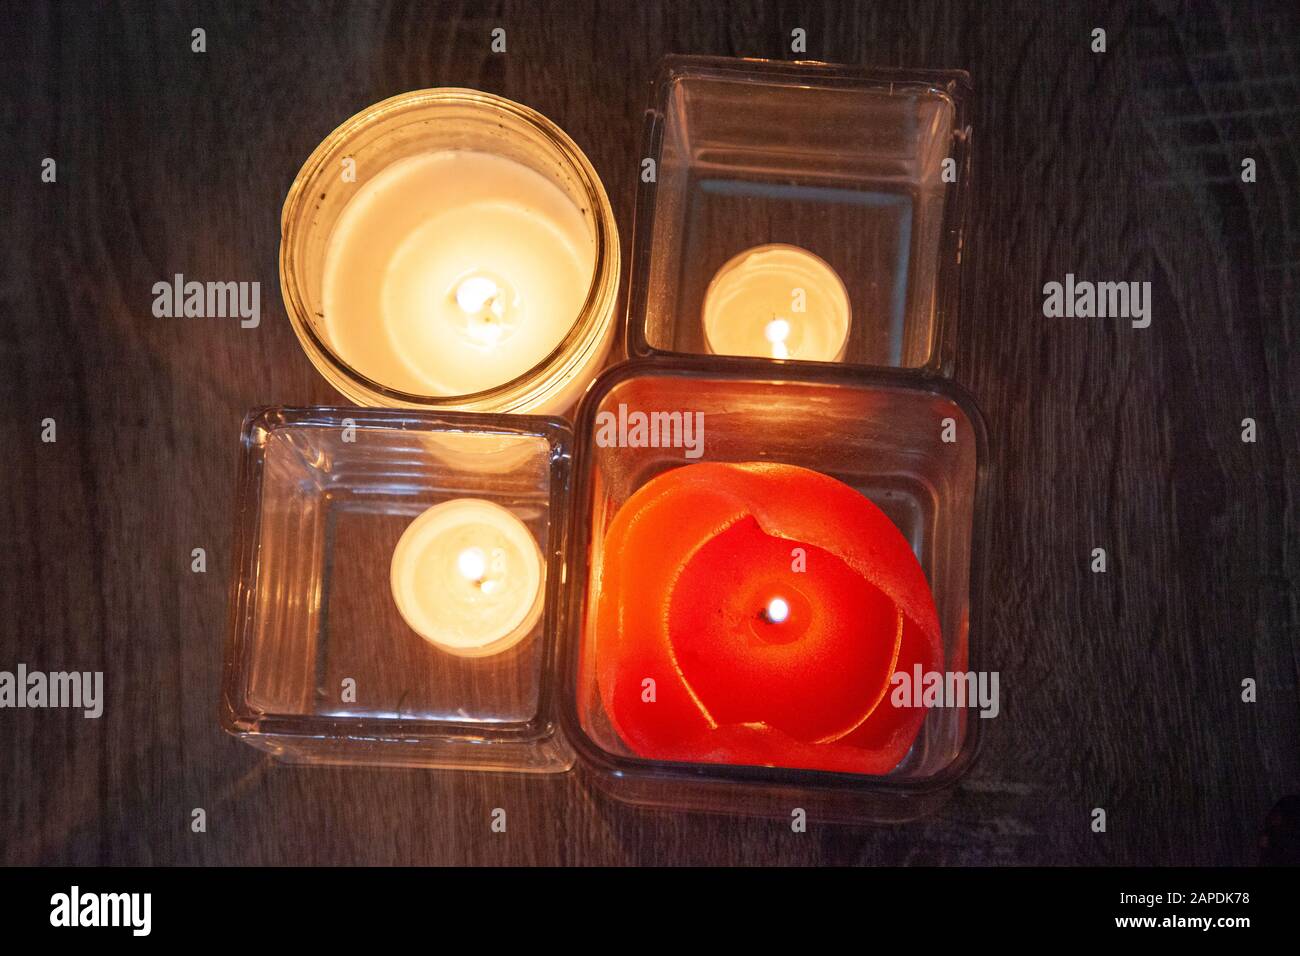 four candles lit and flicker inside glass holders in the darkness Stock Photo